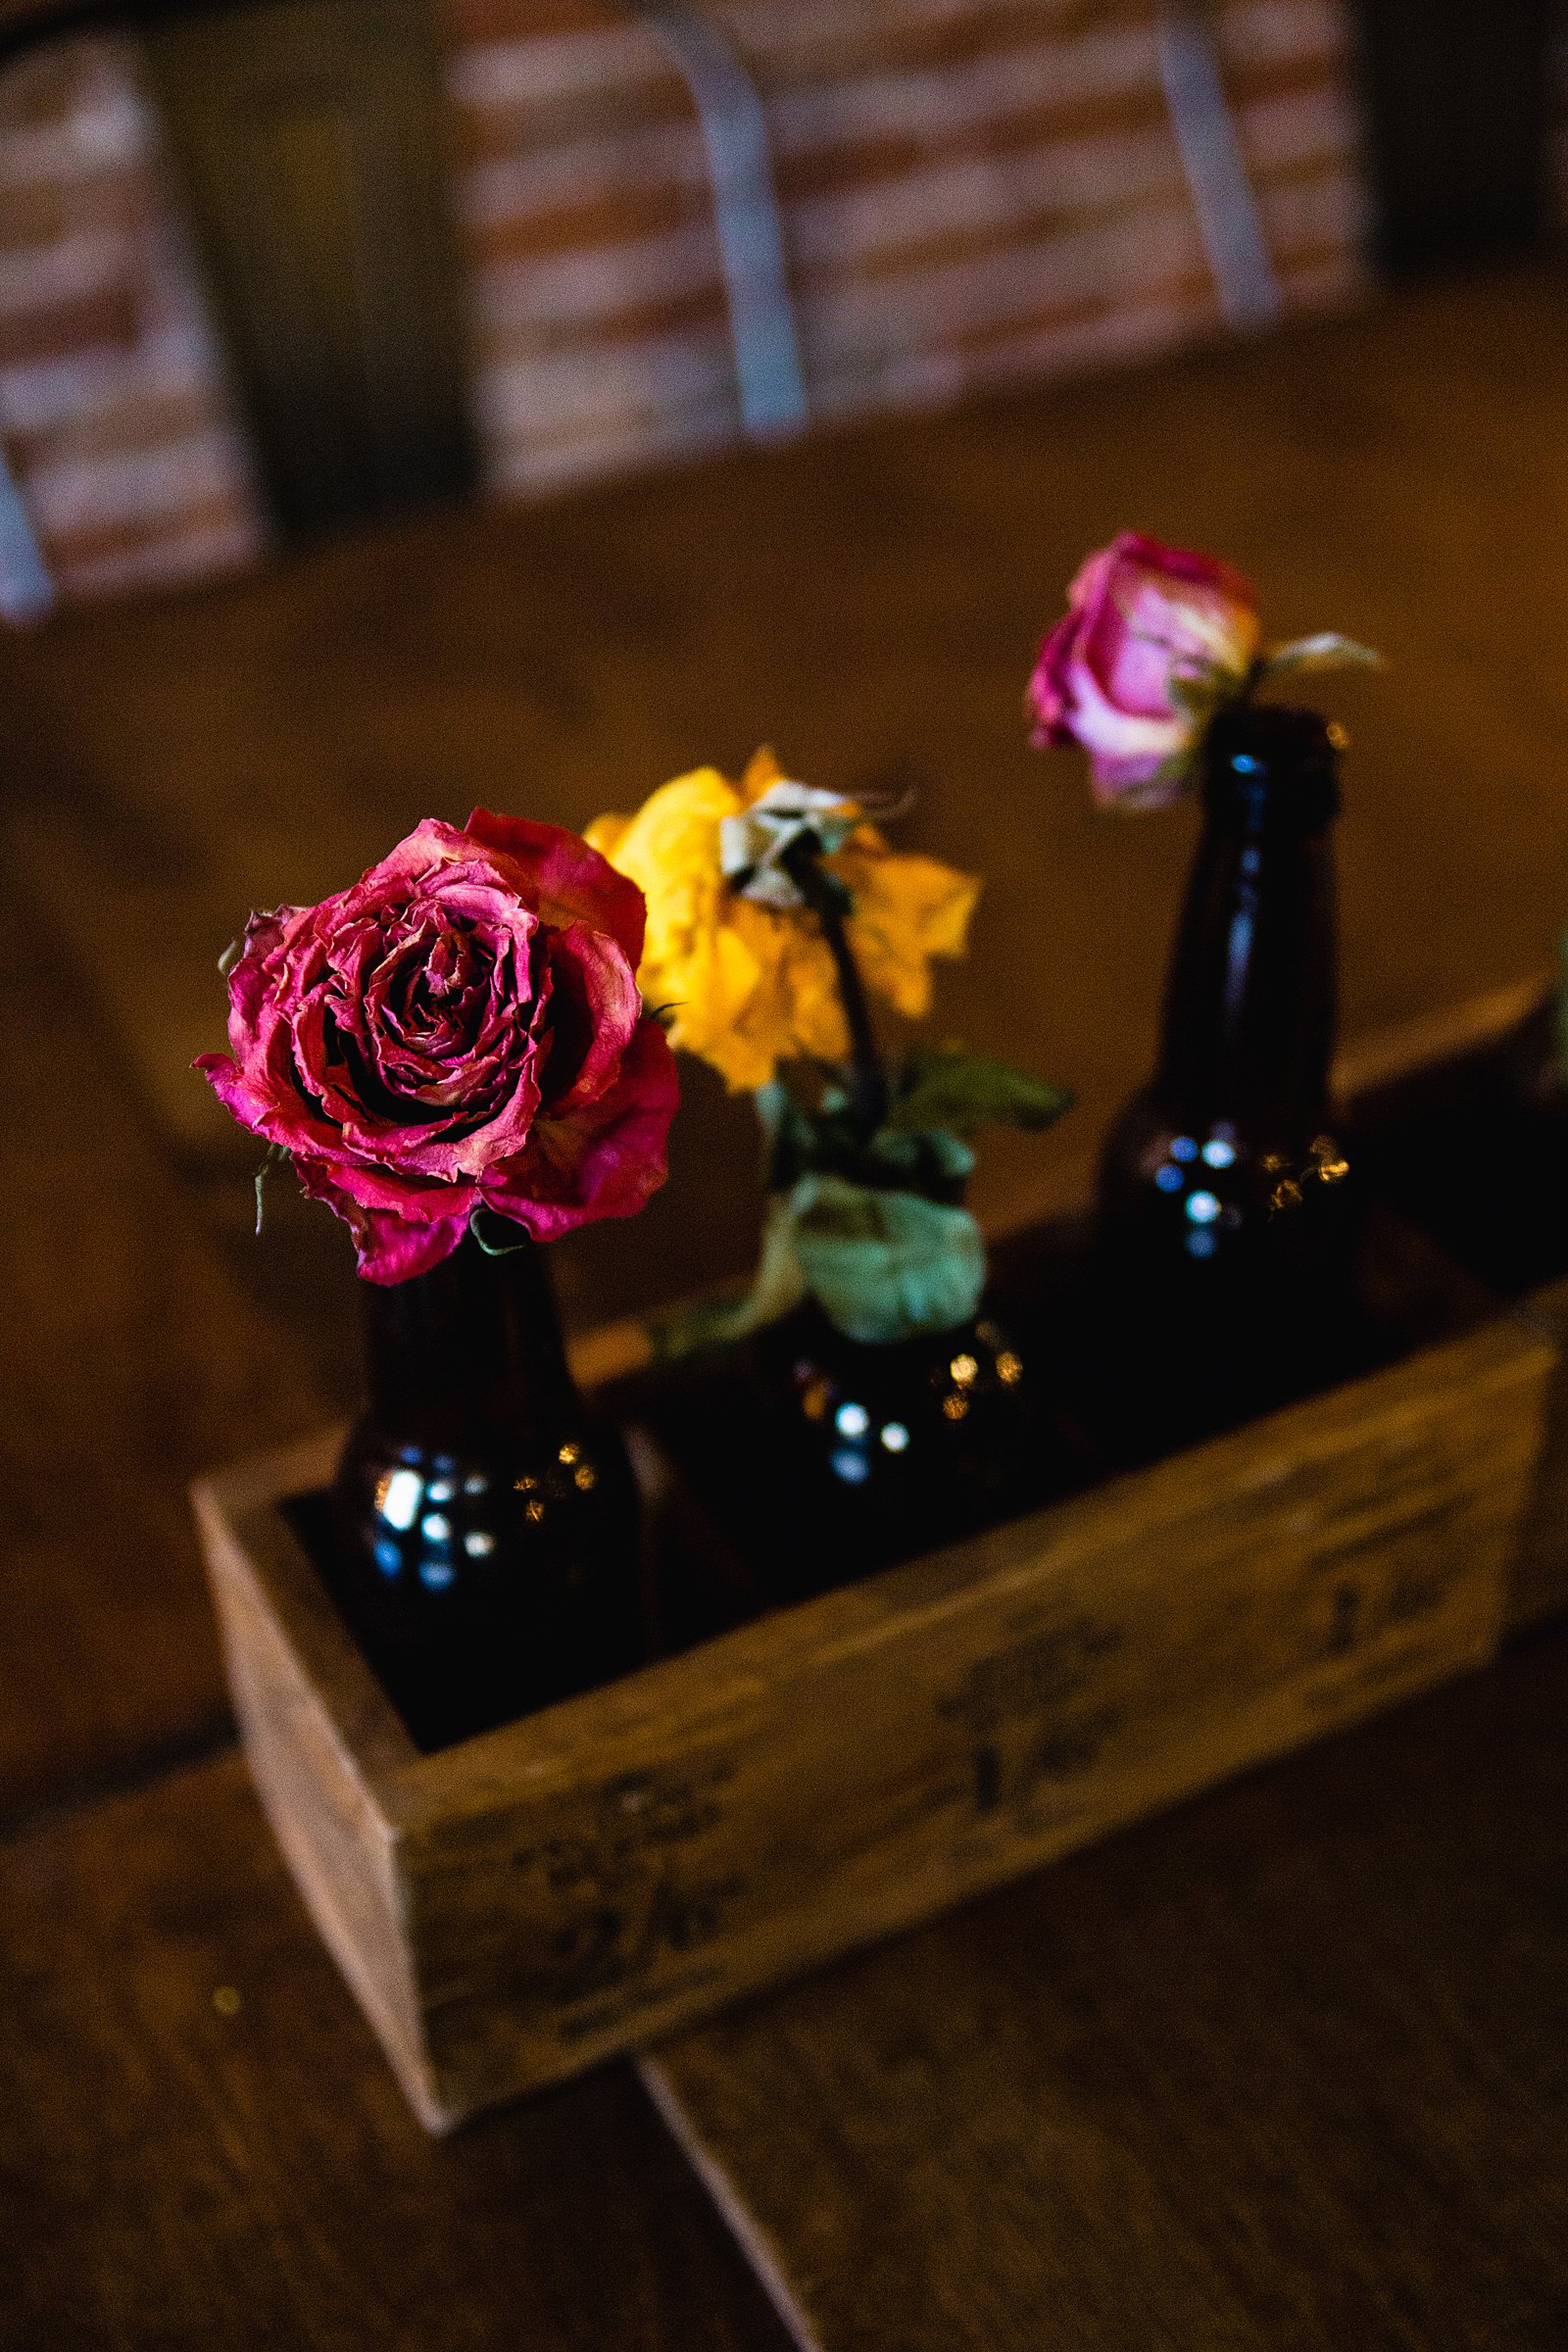 Dried roses in glass bottles at The Nile by Phoenix engagement photographers PMA Photography.